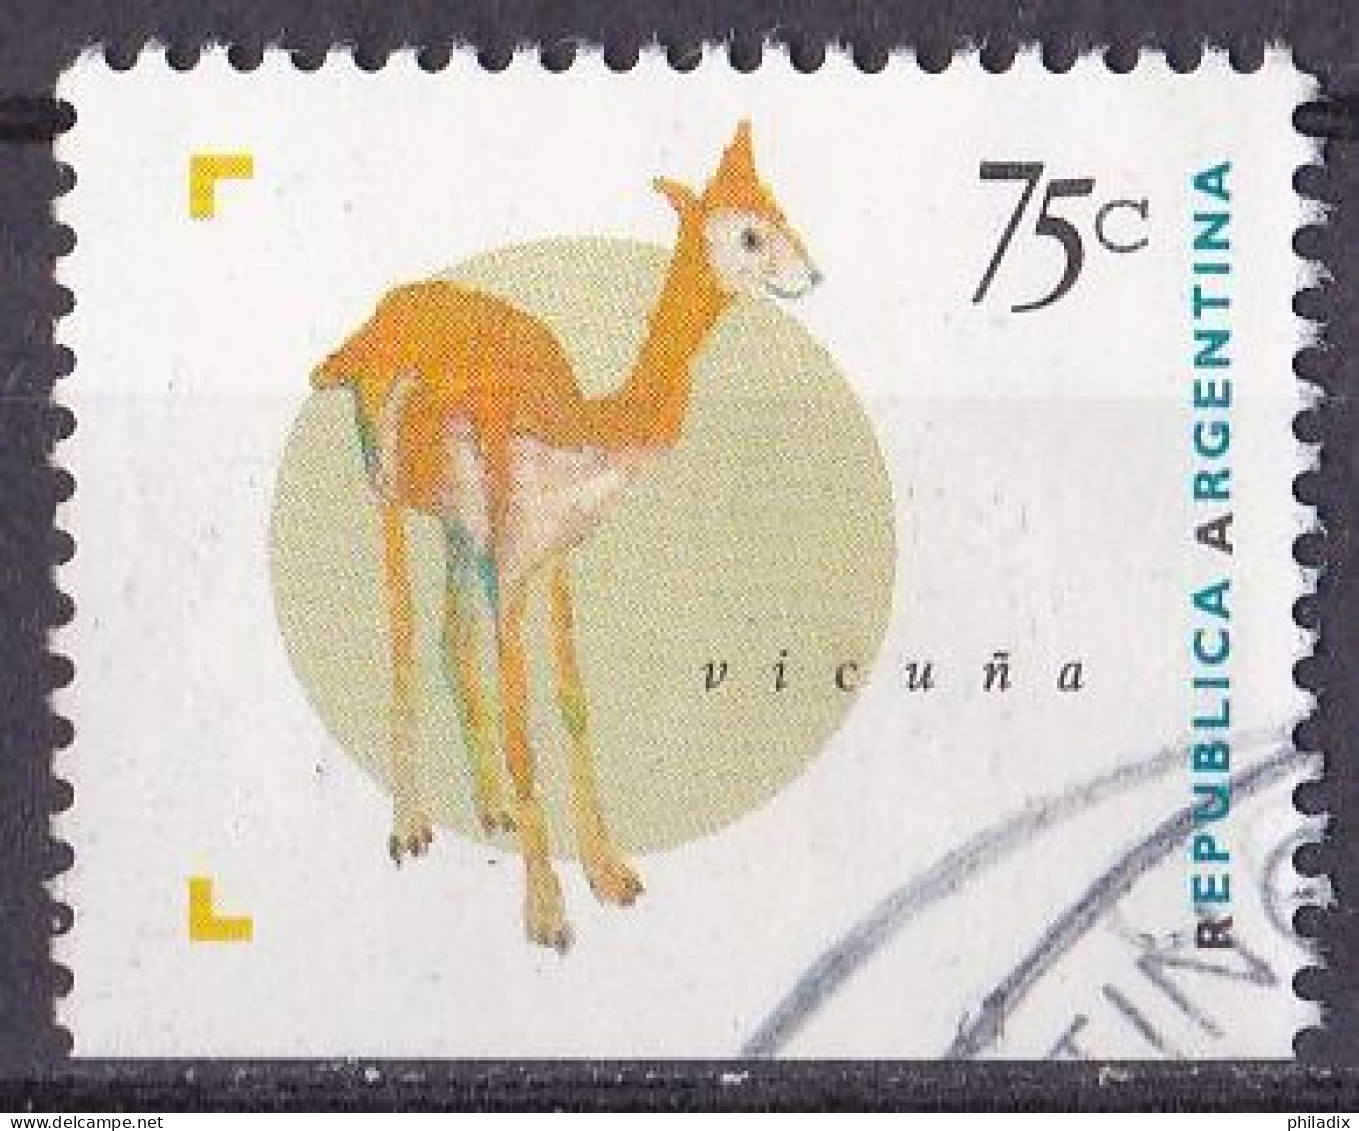 Argentinien Marke Von 1995 O/used (A4-15) - Used Stamps